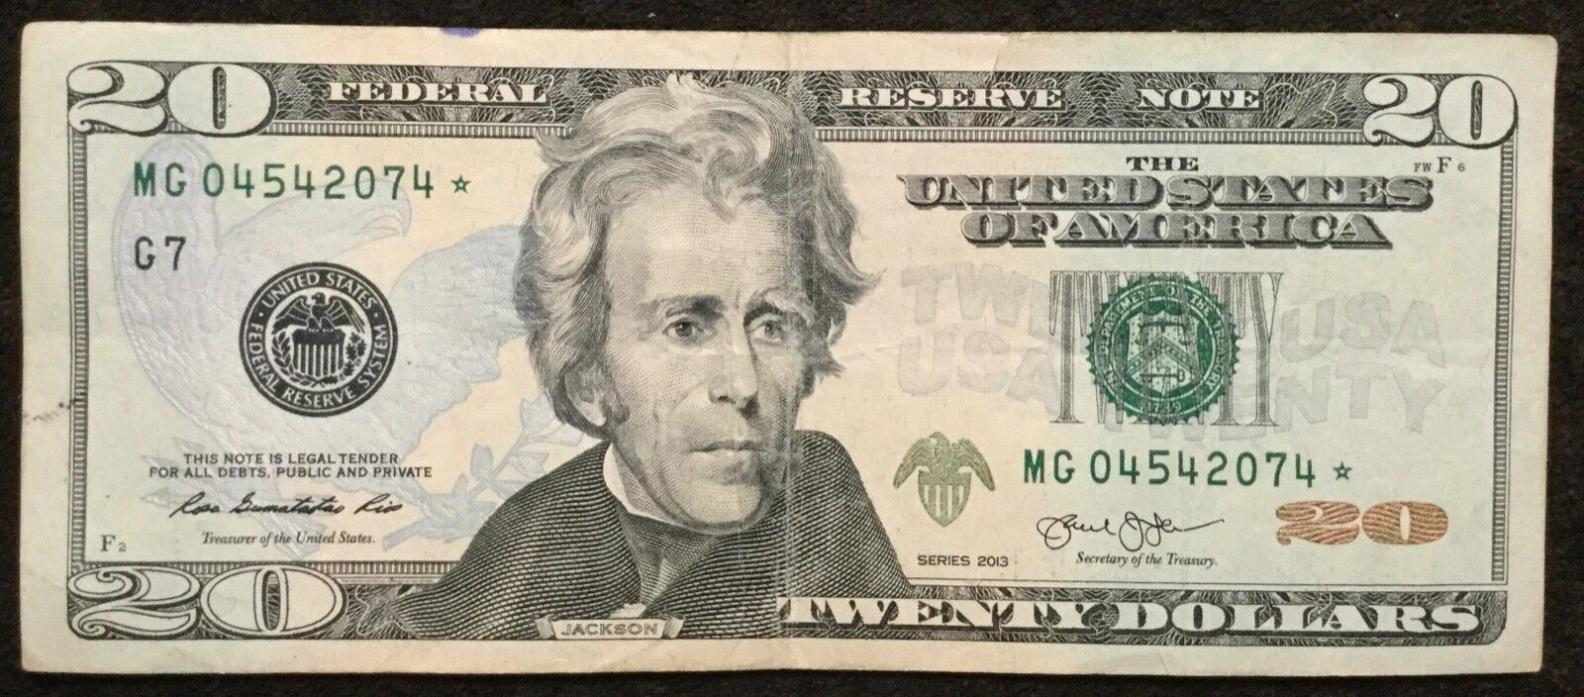 $20 Dollars Bill Star Note Series 2013 Chicago MG04542074* Federal Reserve